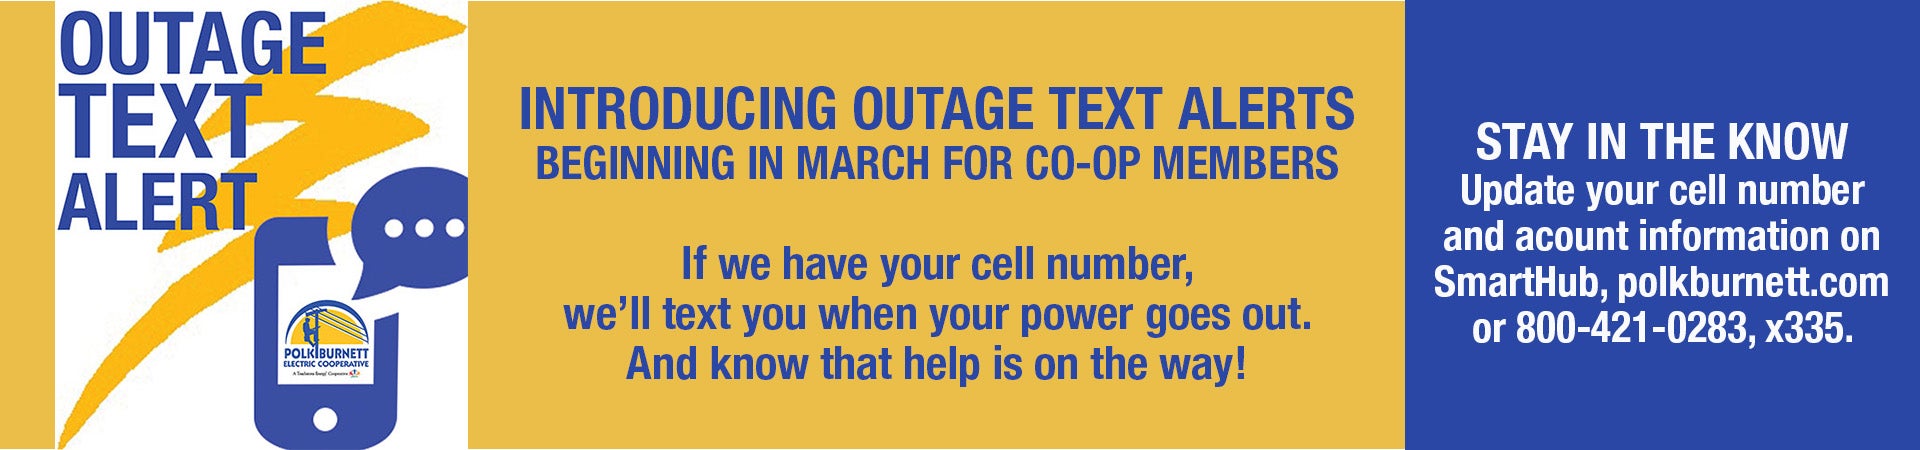 Outage text alerts keep you informed when the power goes out